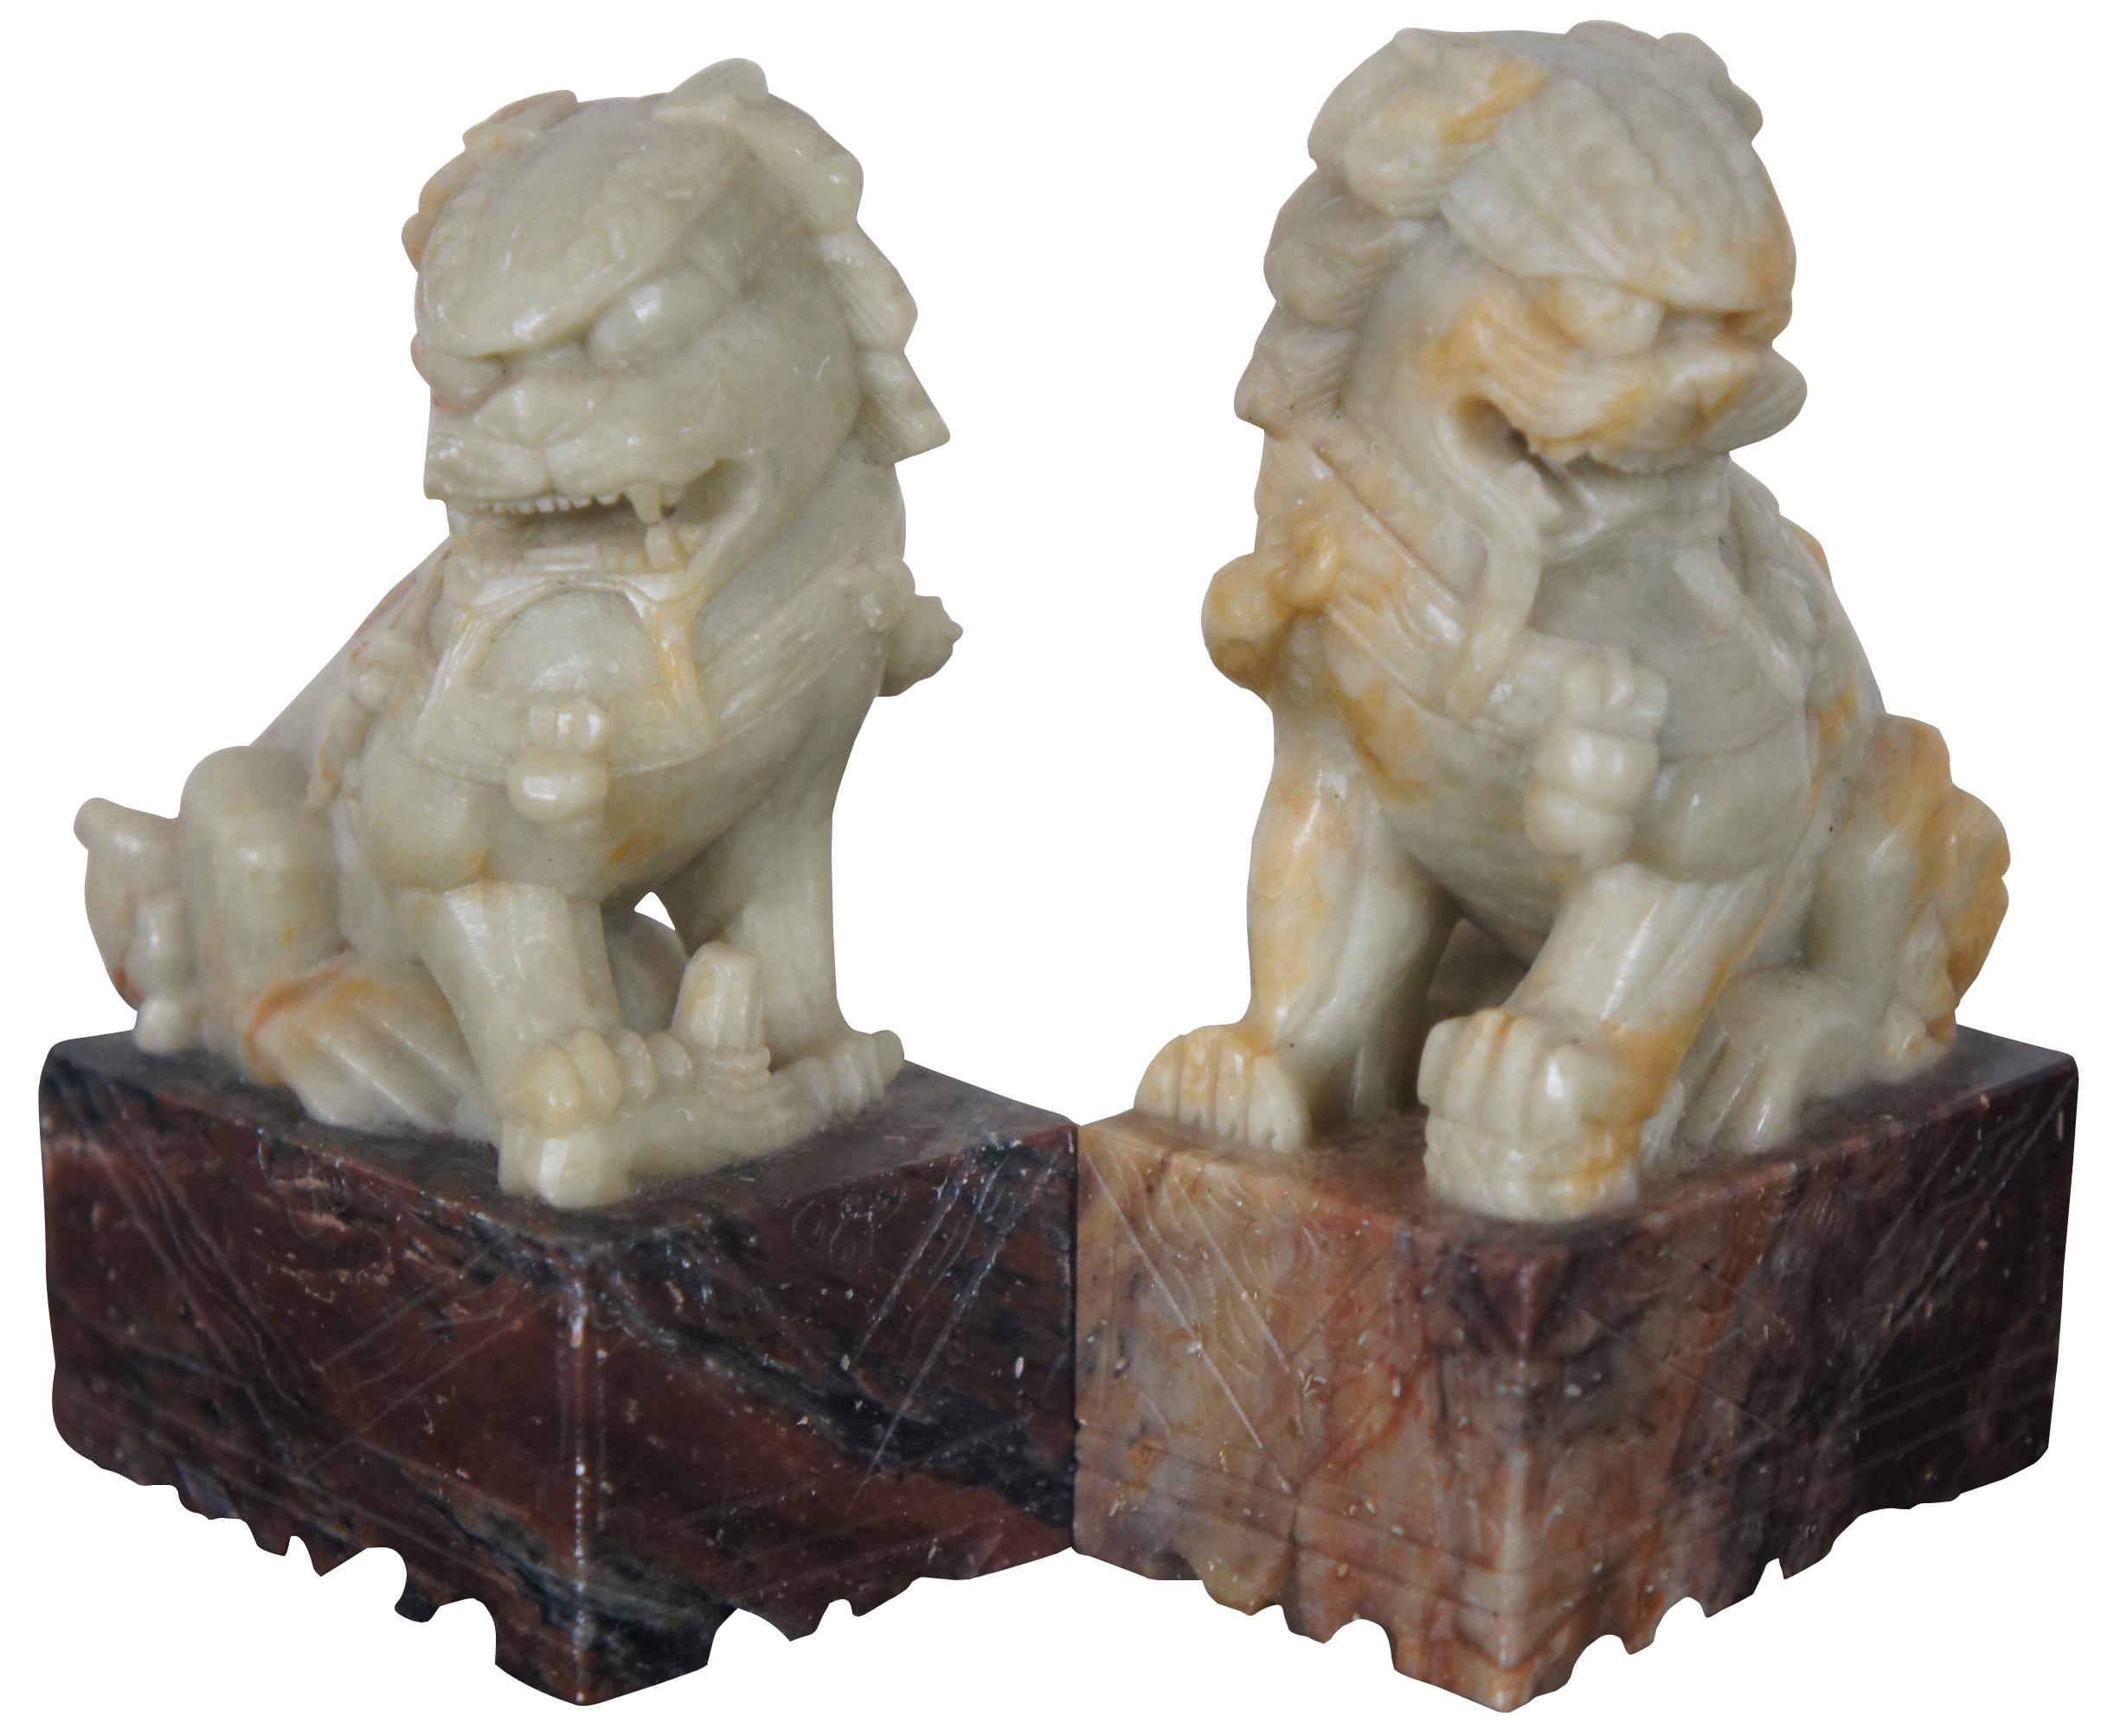 Vintage carved stone Chinese fu dog bookend or figurine pair. Measure: 4